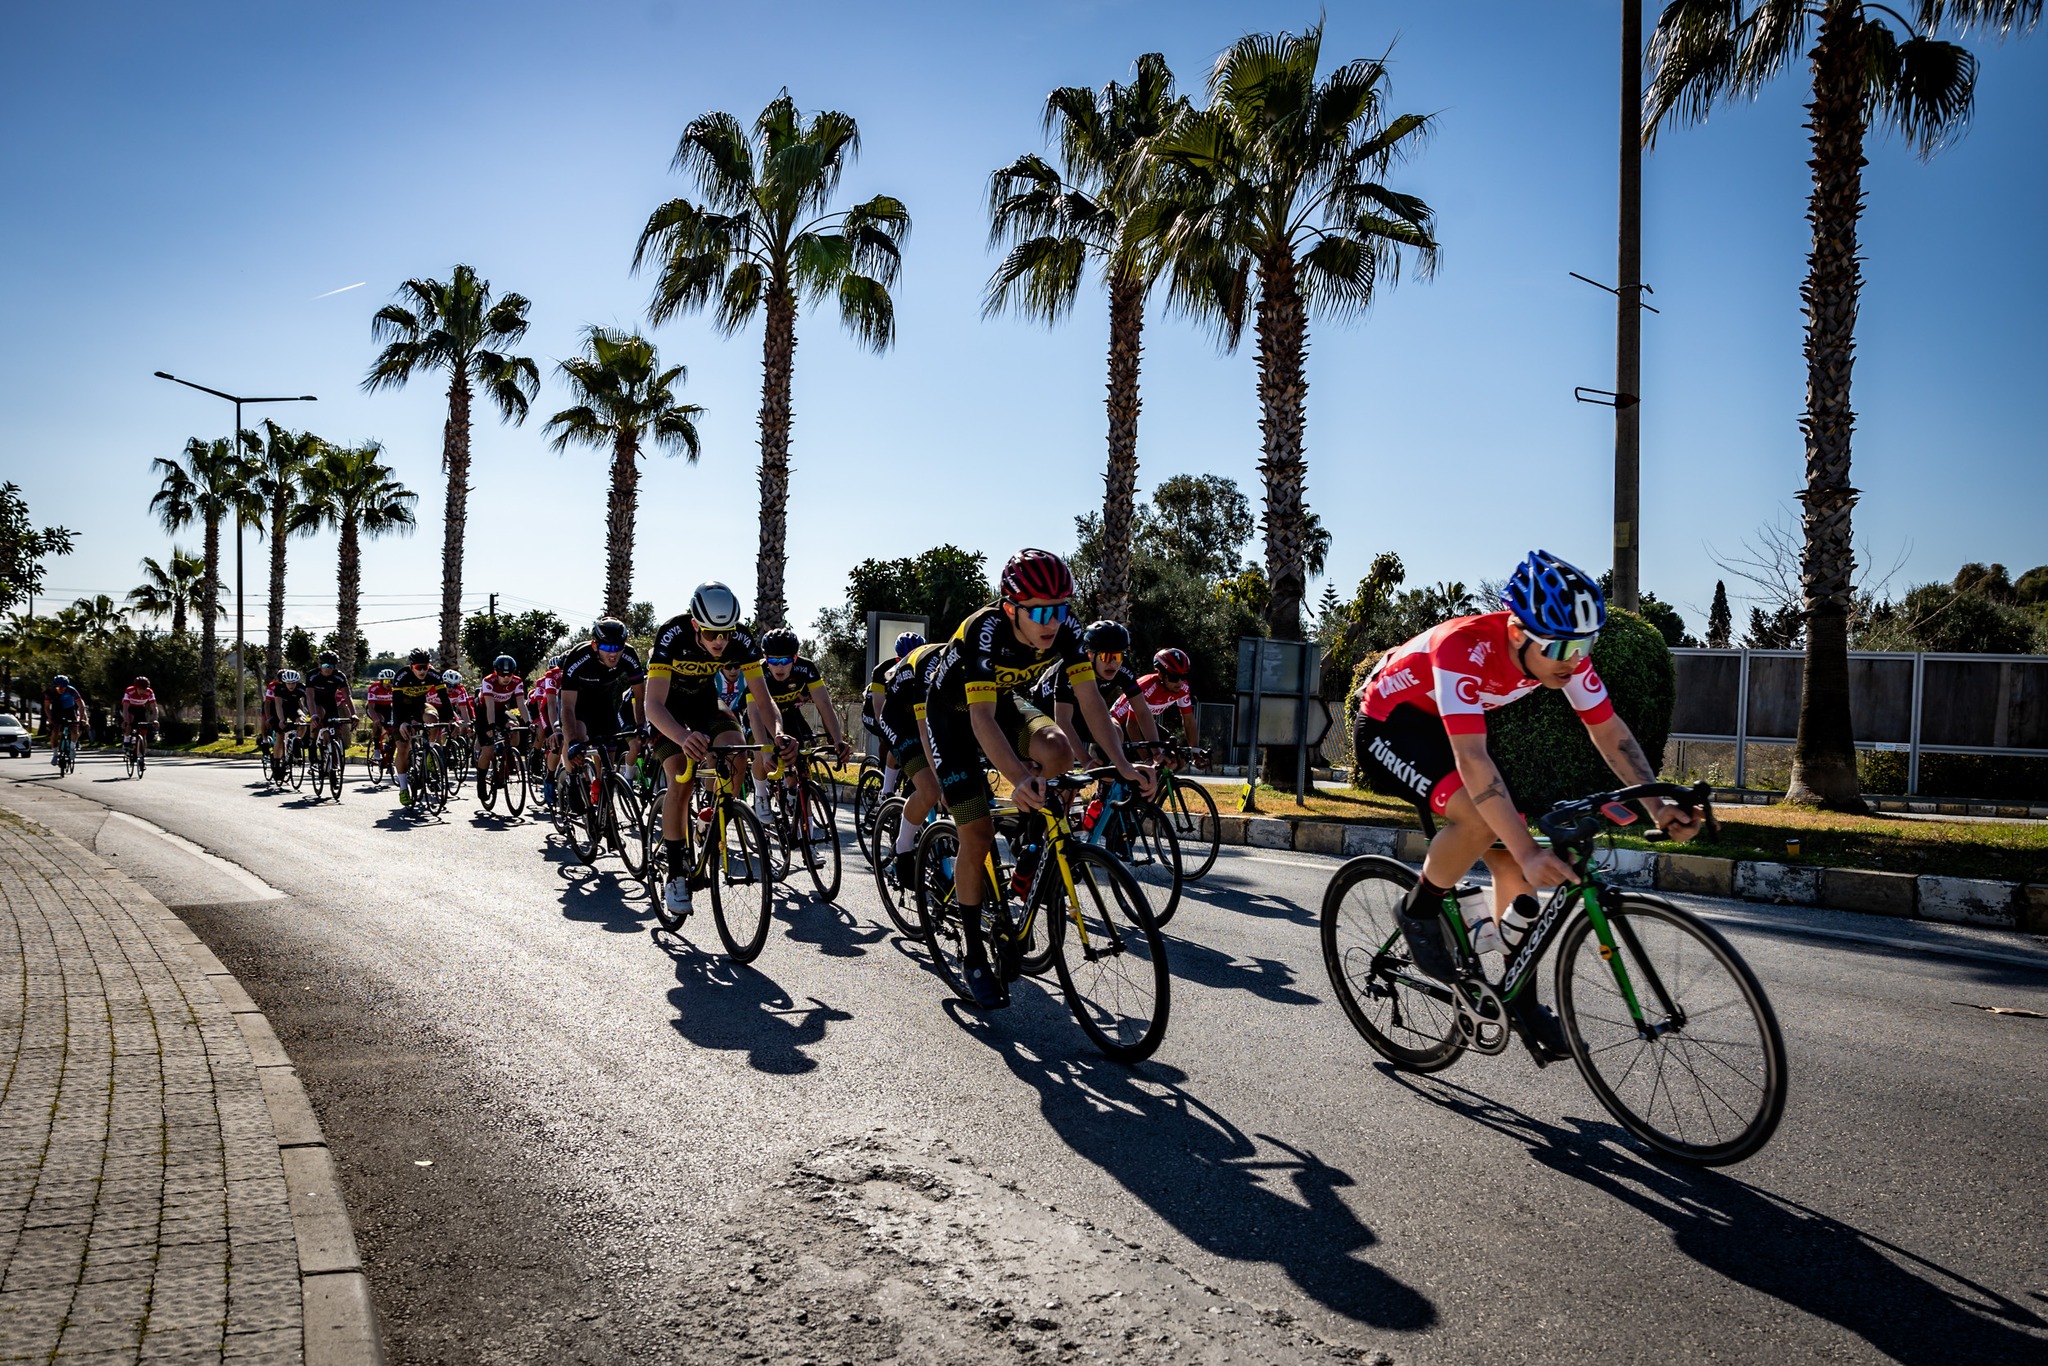 THE START OF THE WINTER CYCLING RACES WAS HELD IN SİDE